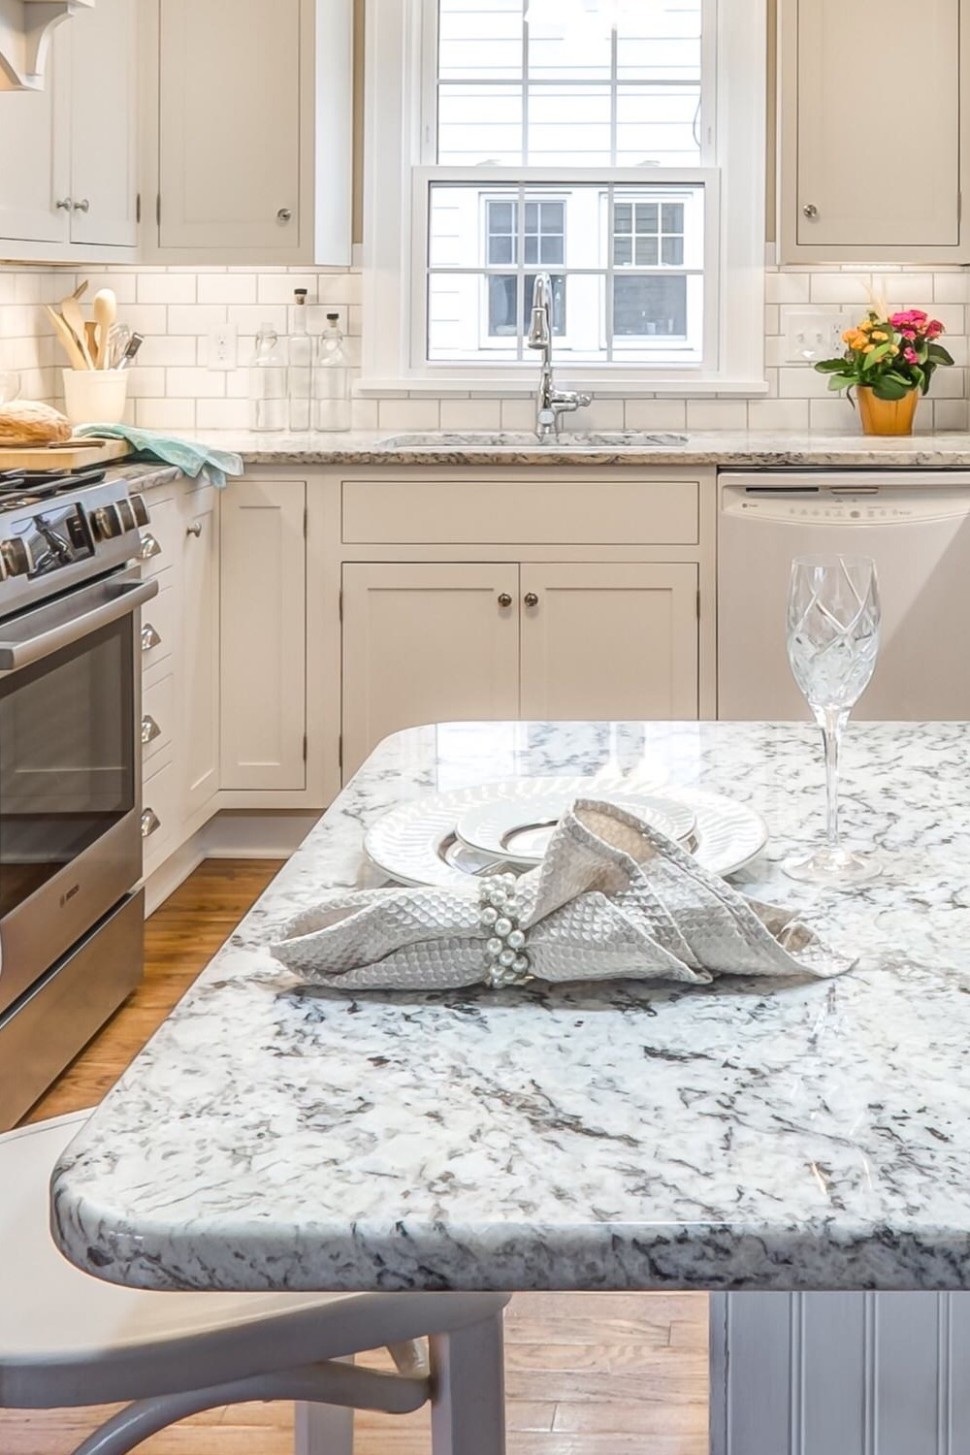 8+ Best White Granite With White Cabinets  CountertopsNews - what color granite countertops go with white cabinets?